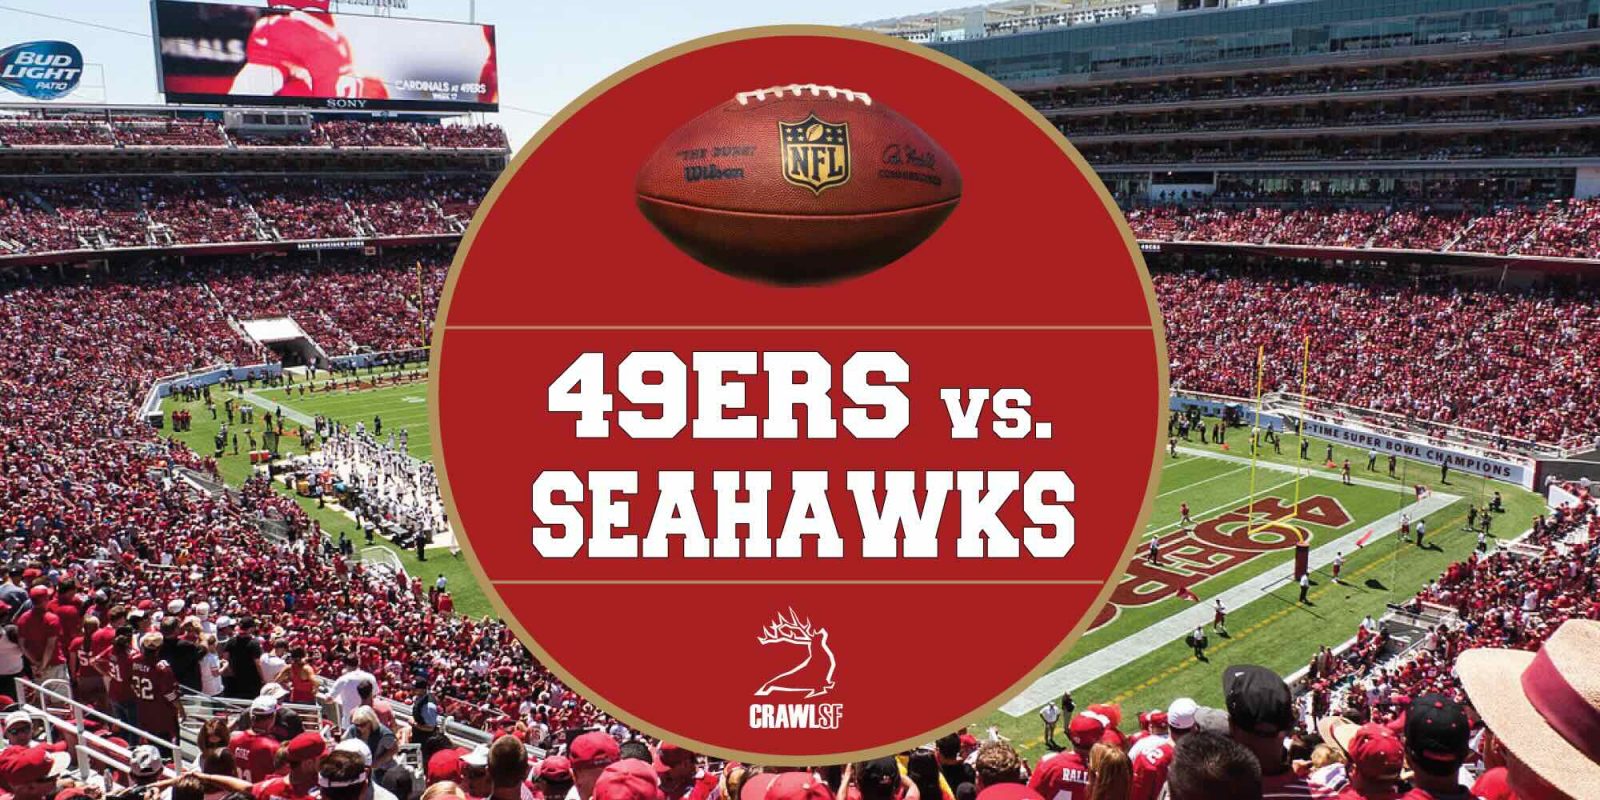 when do the 49ers play seahawks